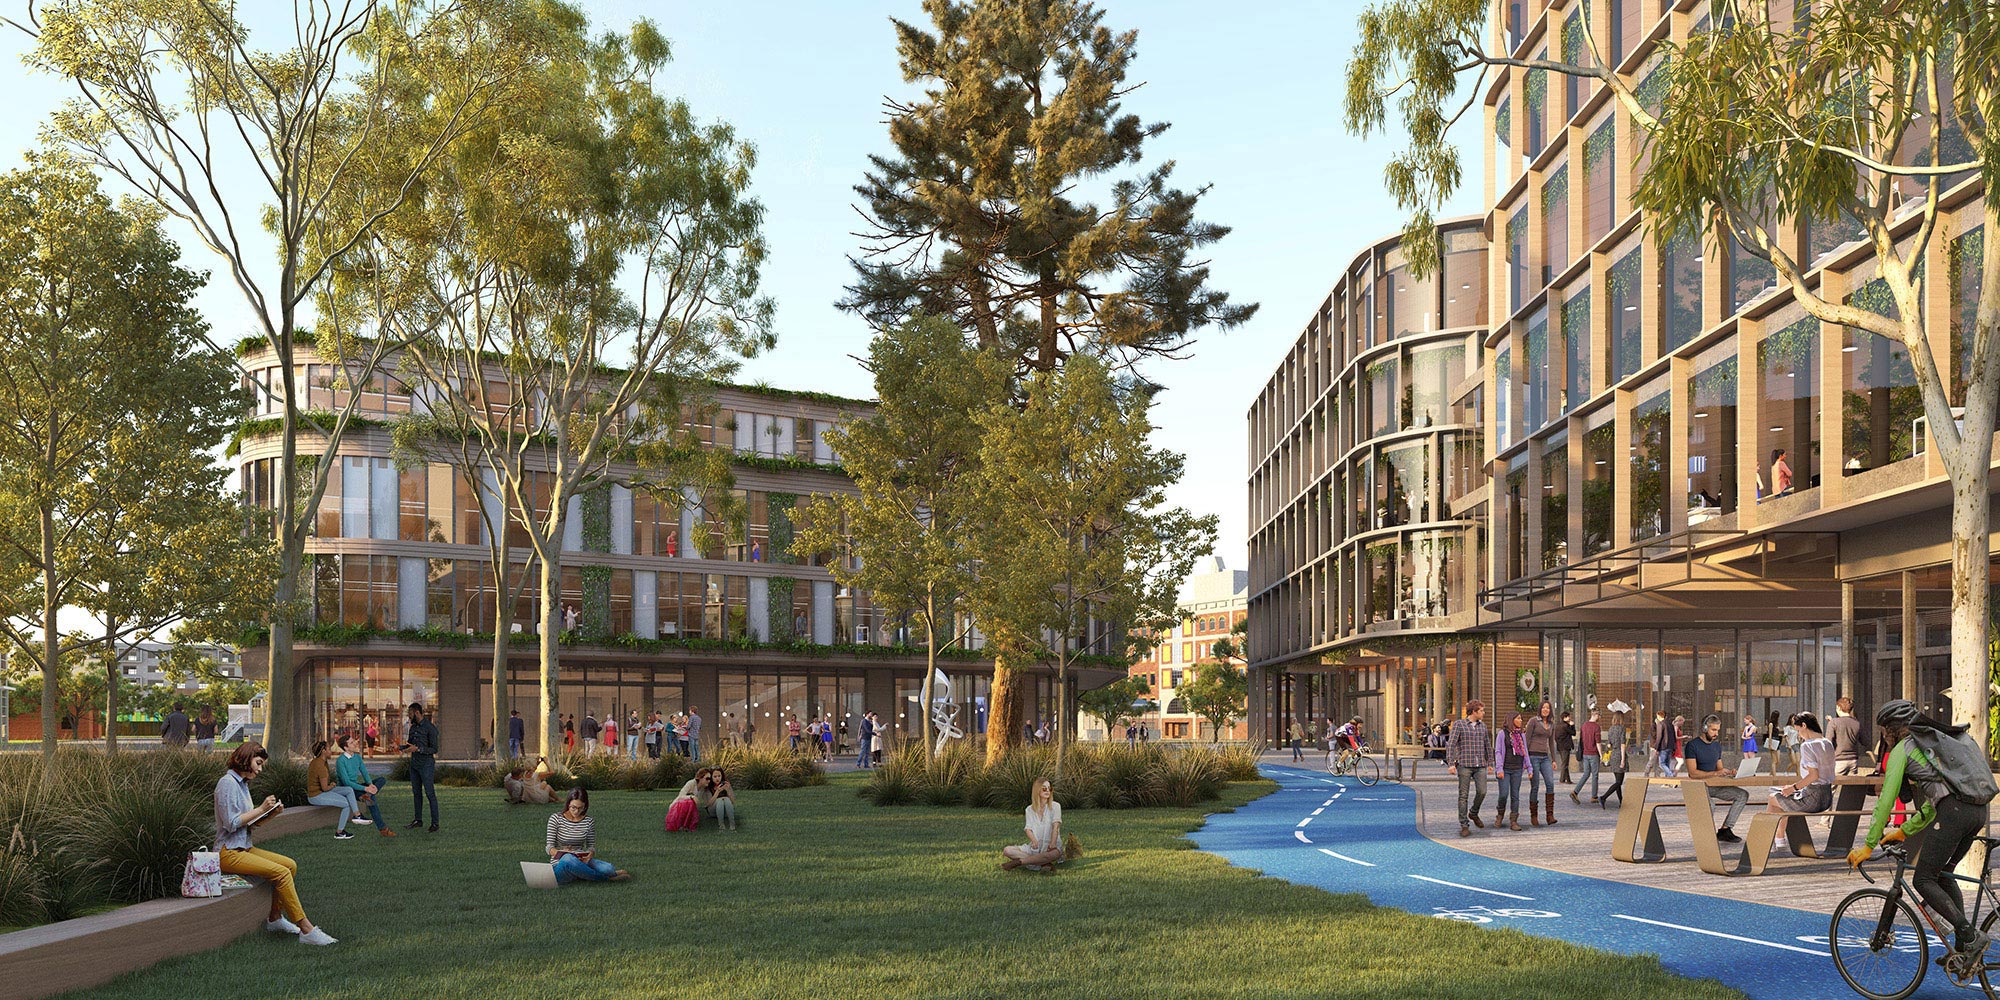 Artist impression of the new campus heart in Midtown precinct